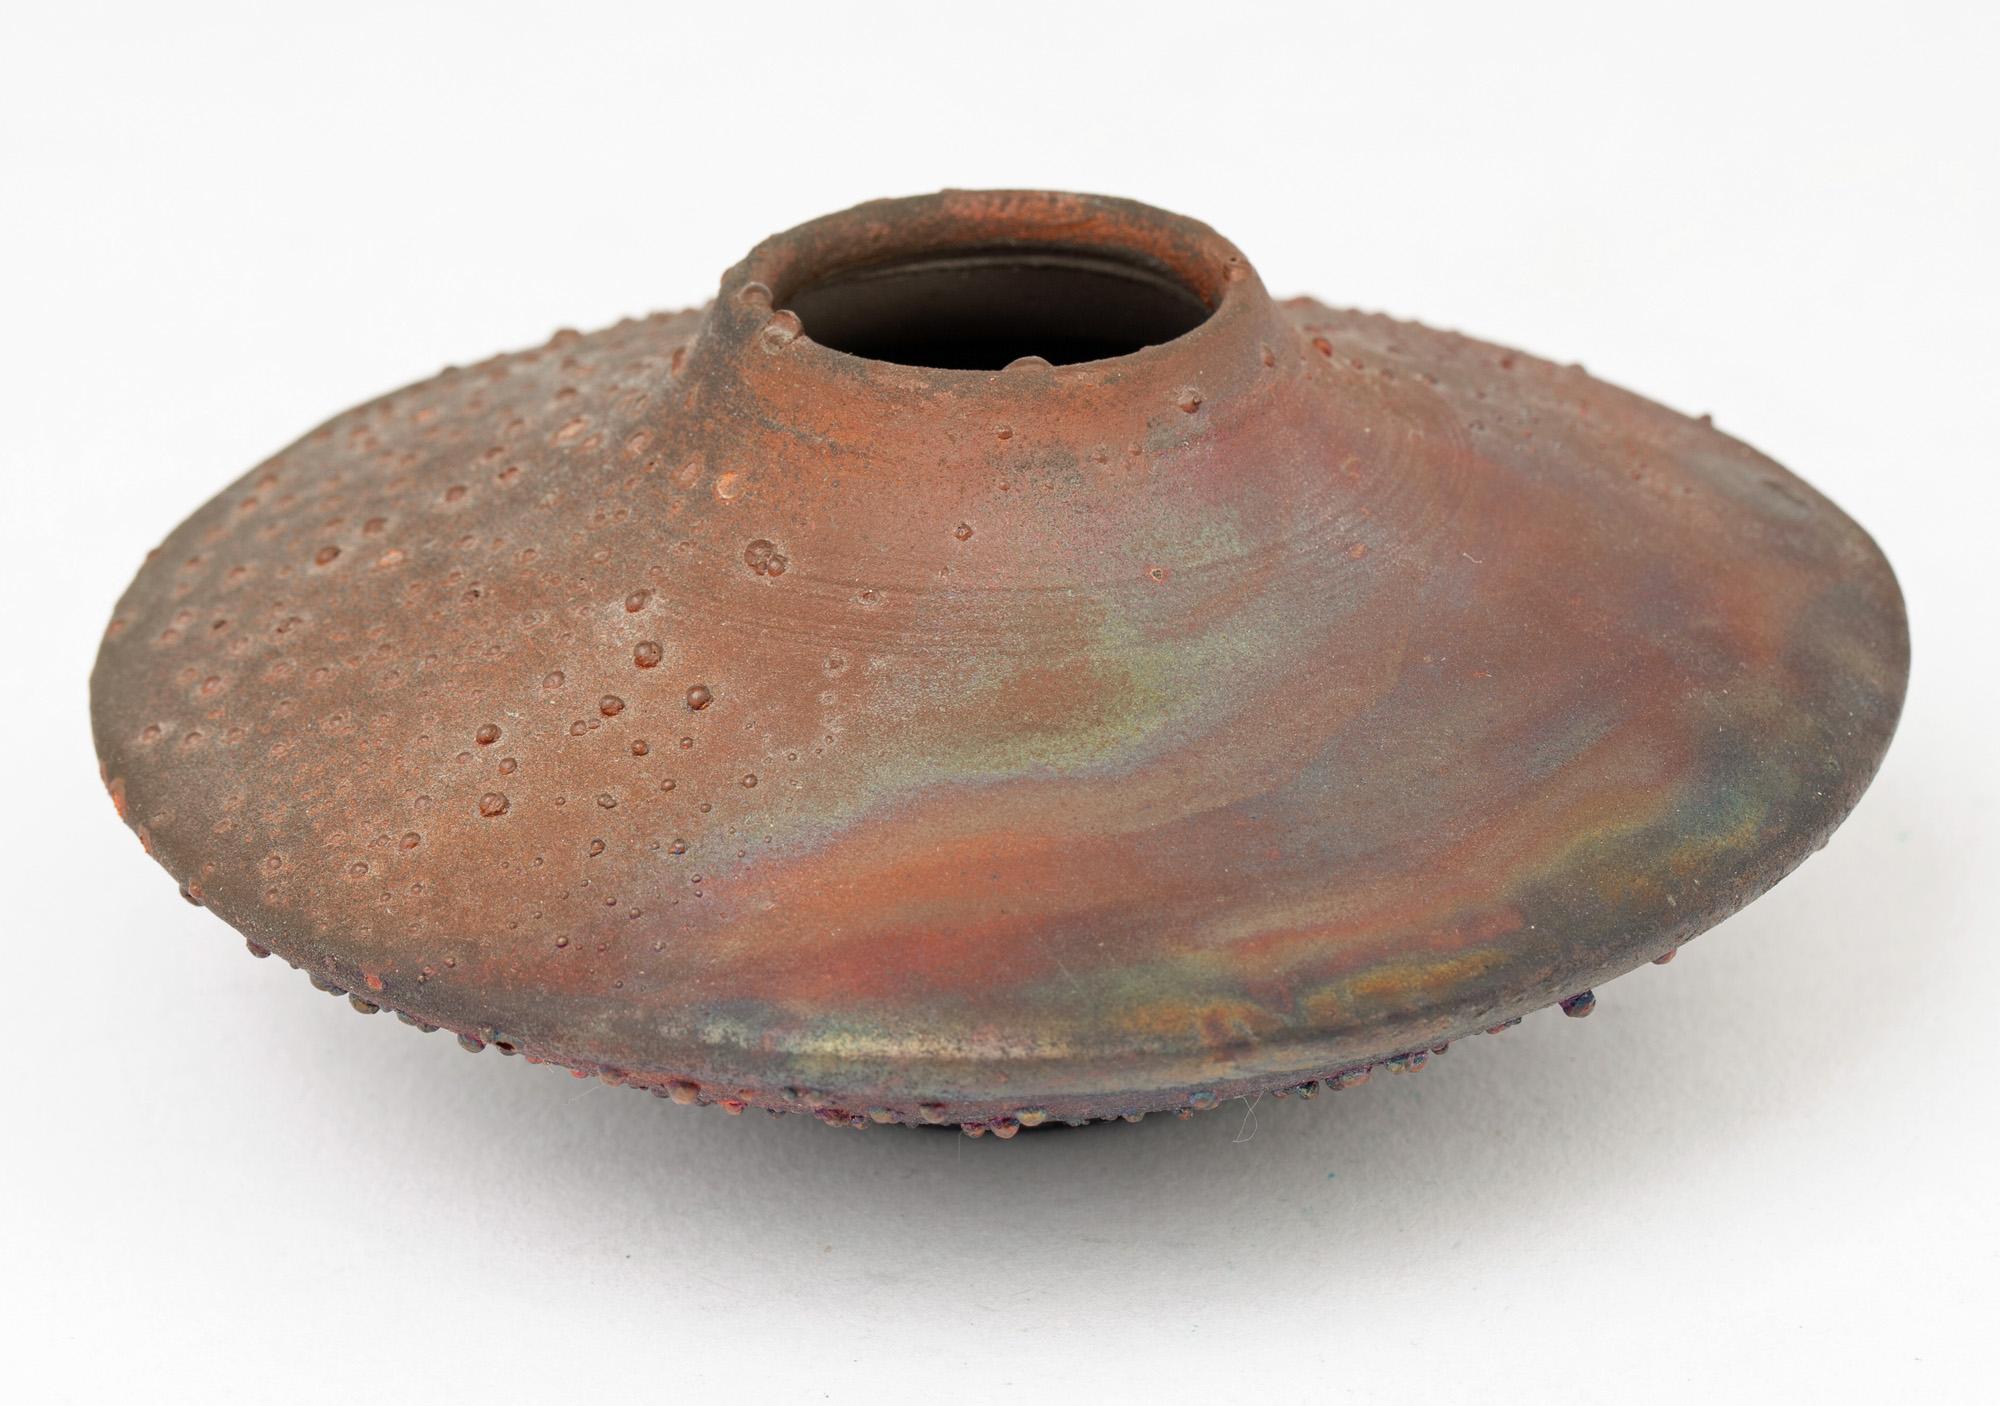 A stylish raku glazed squat form studio pottery vase by renowned USA potter Norman Bacon and made between the 1970’s and 1990’s. Based in Woodstock, NY, Bacon produced a number of interesting and unique pieces and this delightful vase is a wonderful